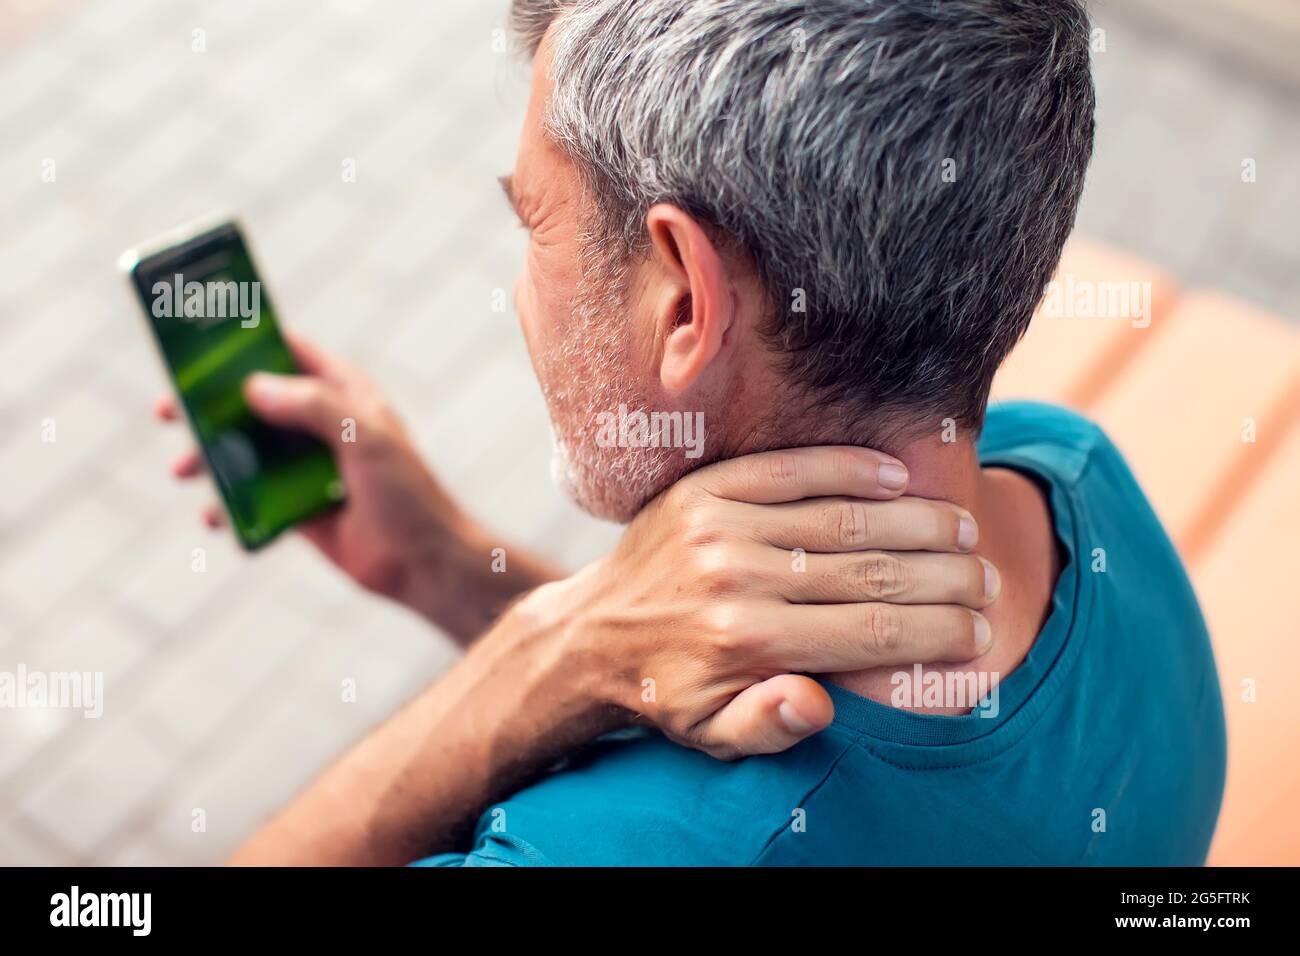 Neck pain using smartphone outdoor. Healthcare, lifestyle and technology concept Stock Photo